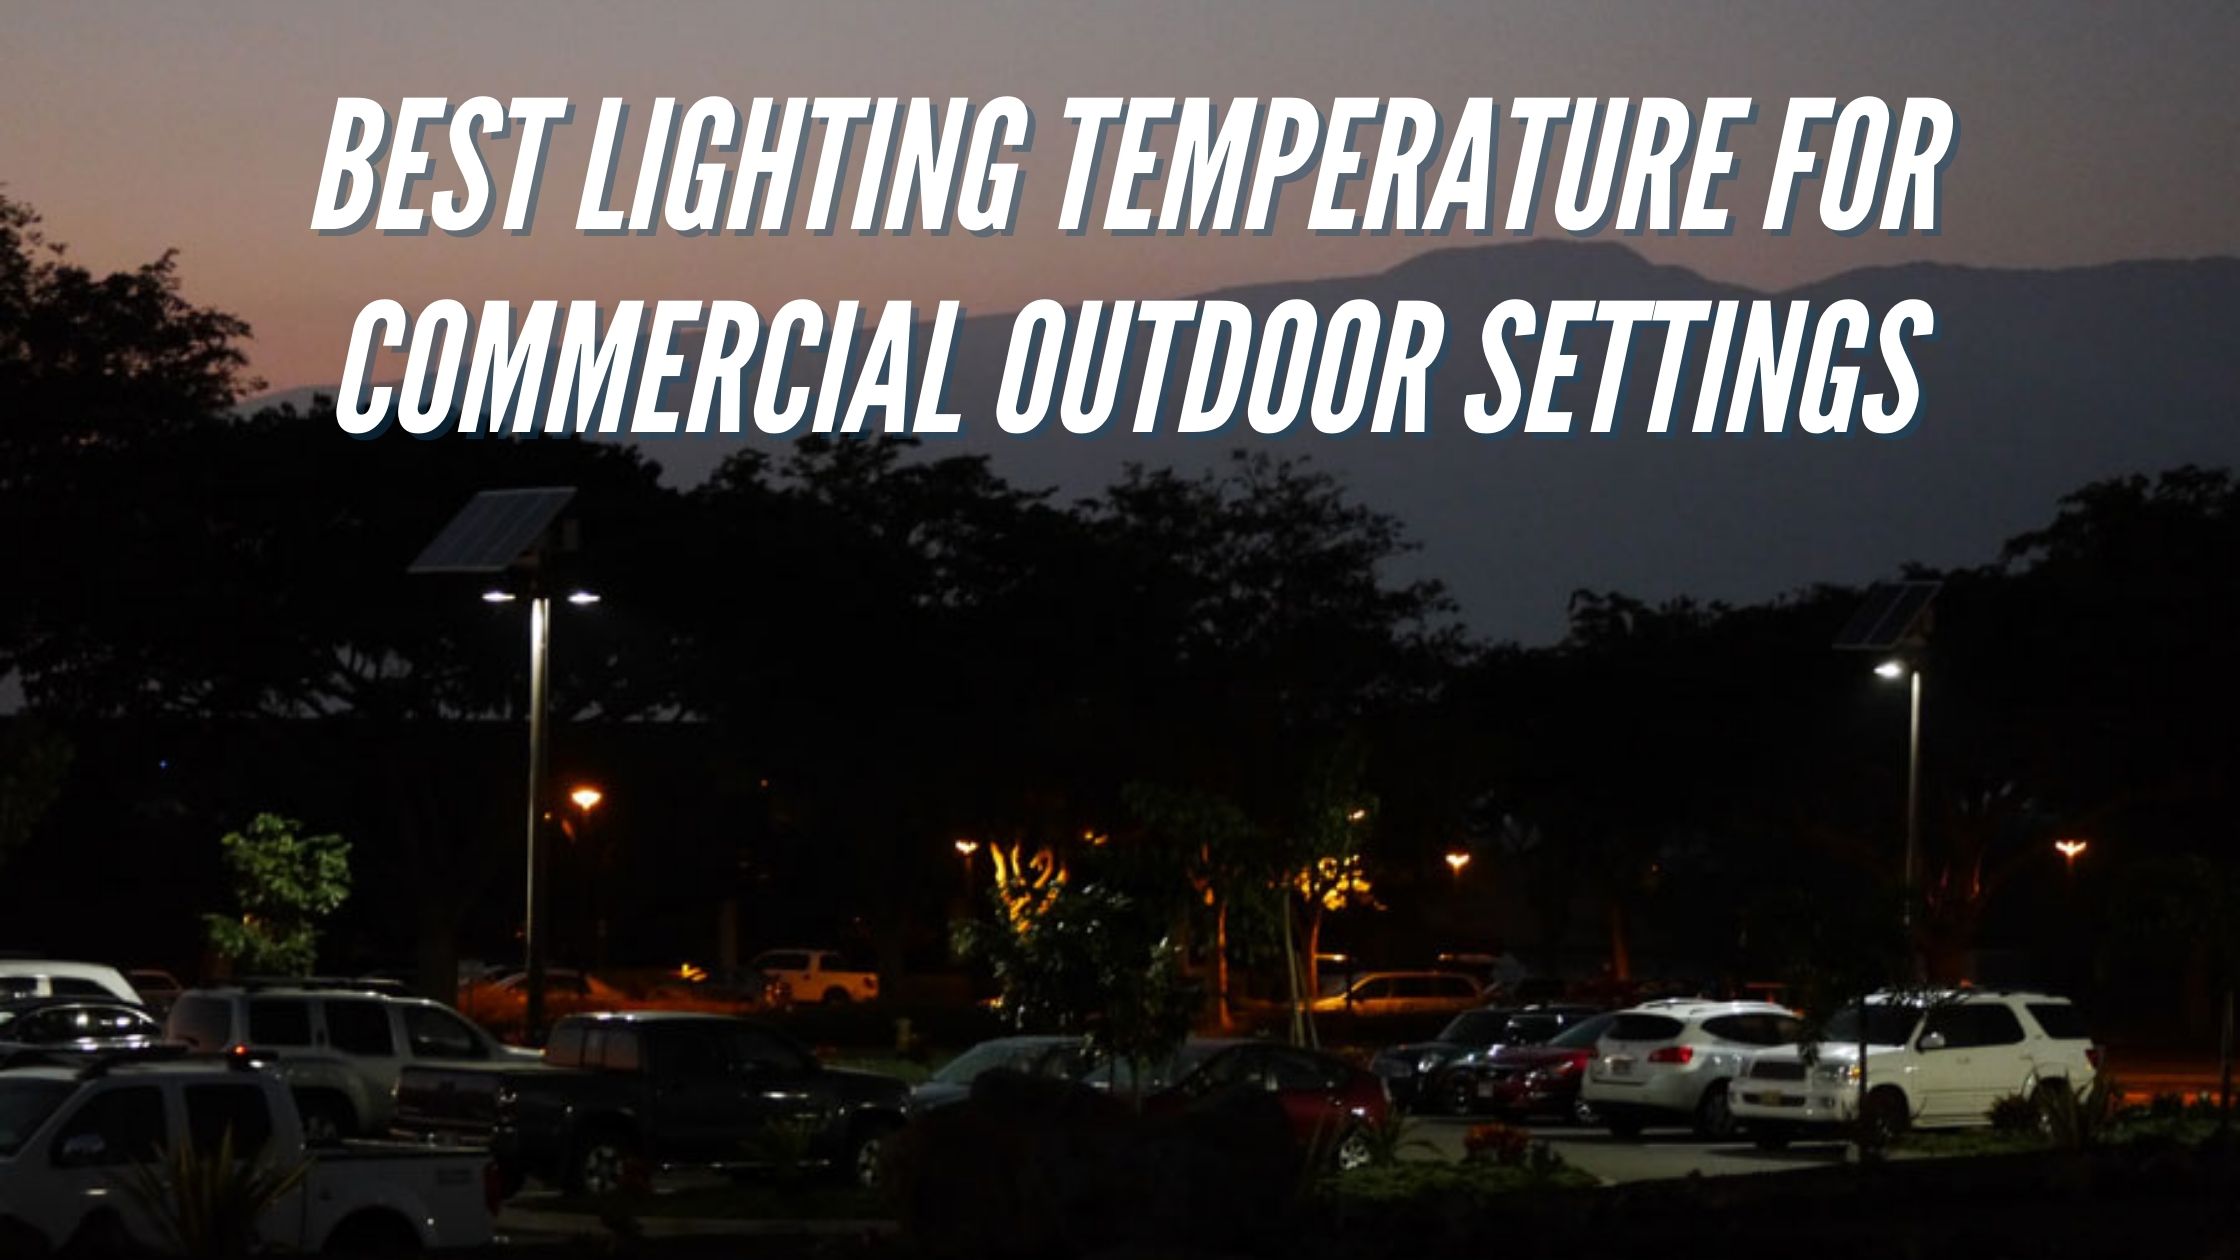 Best Lighting Temperature for Commercial Outdoor Settings